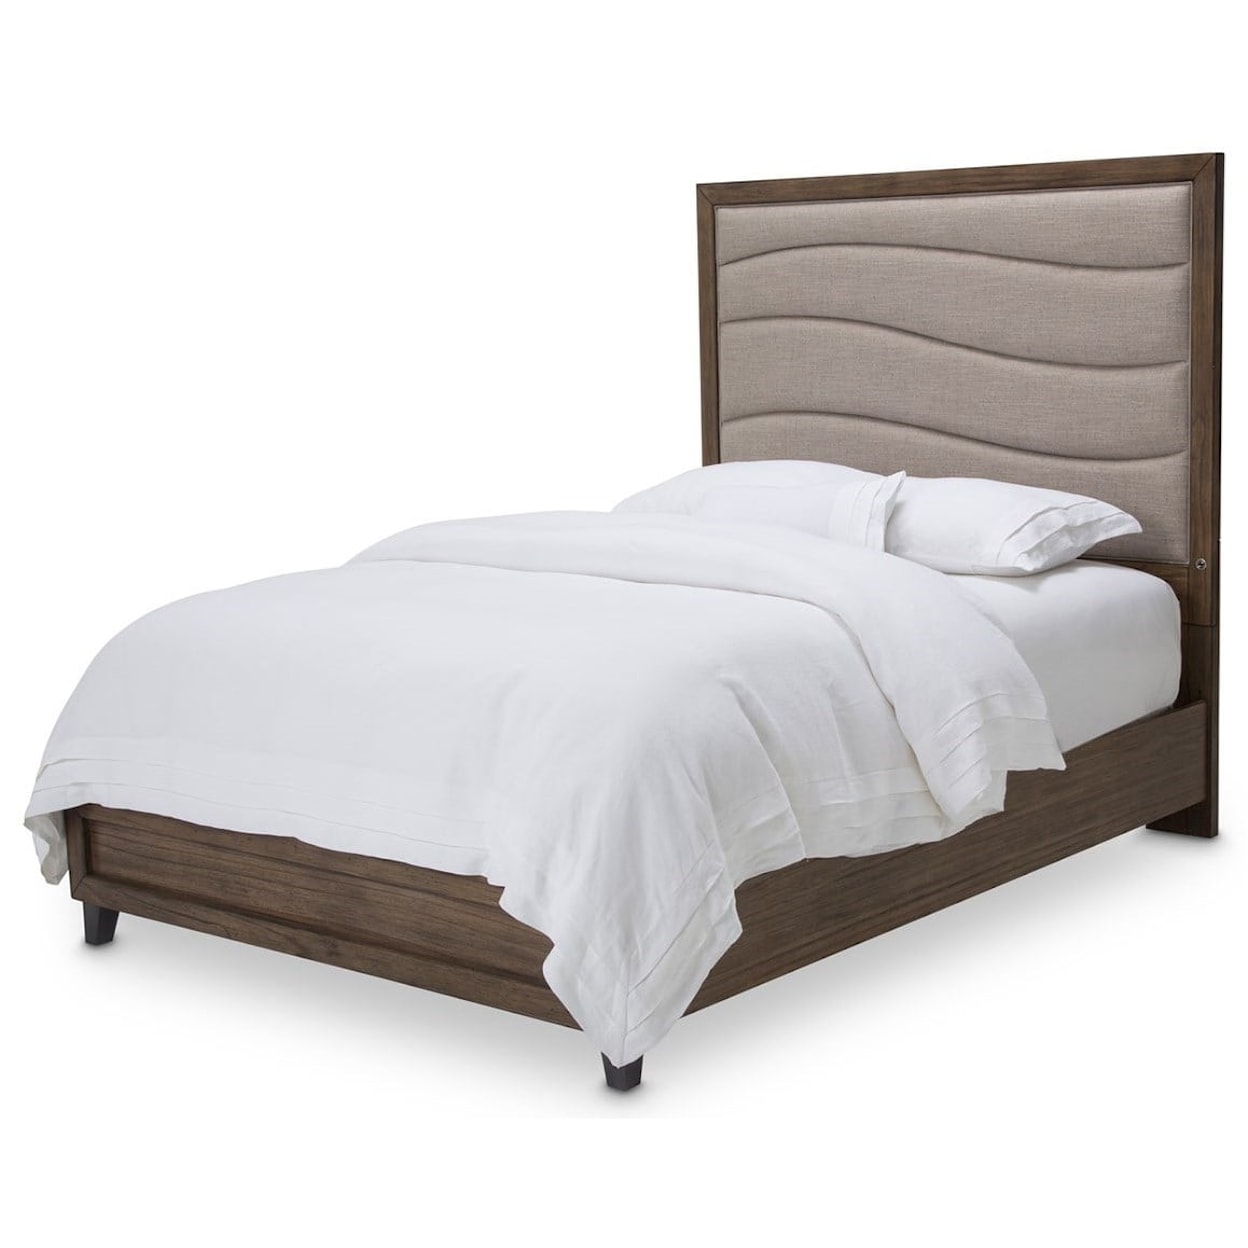 Michael Amini Del Mar Sound King Bed with Upholstered Headboard